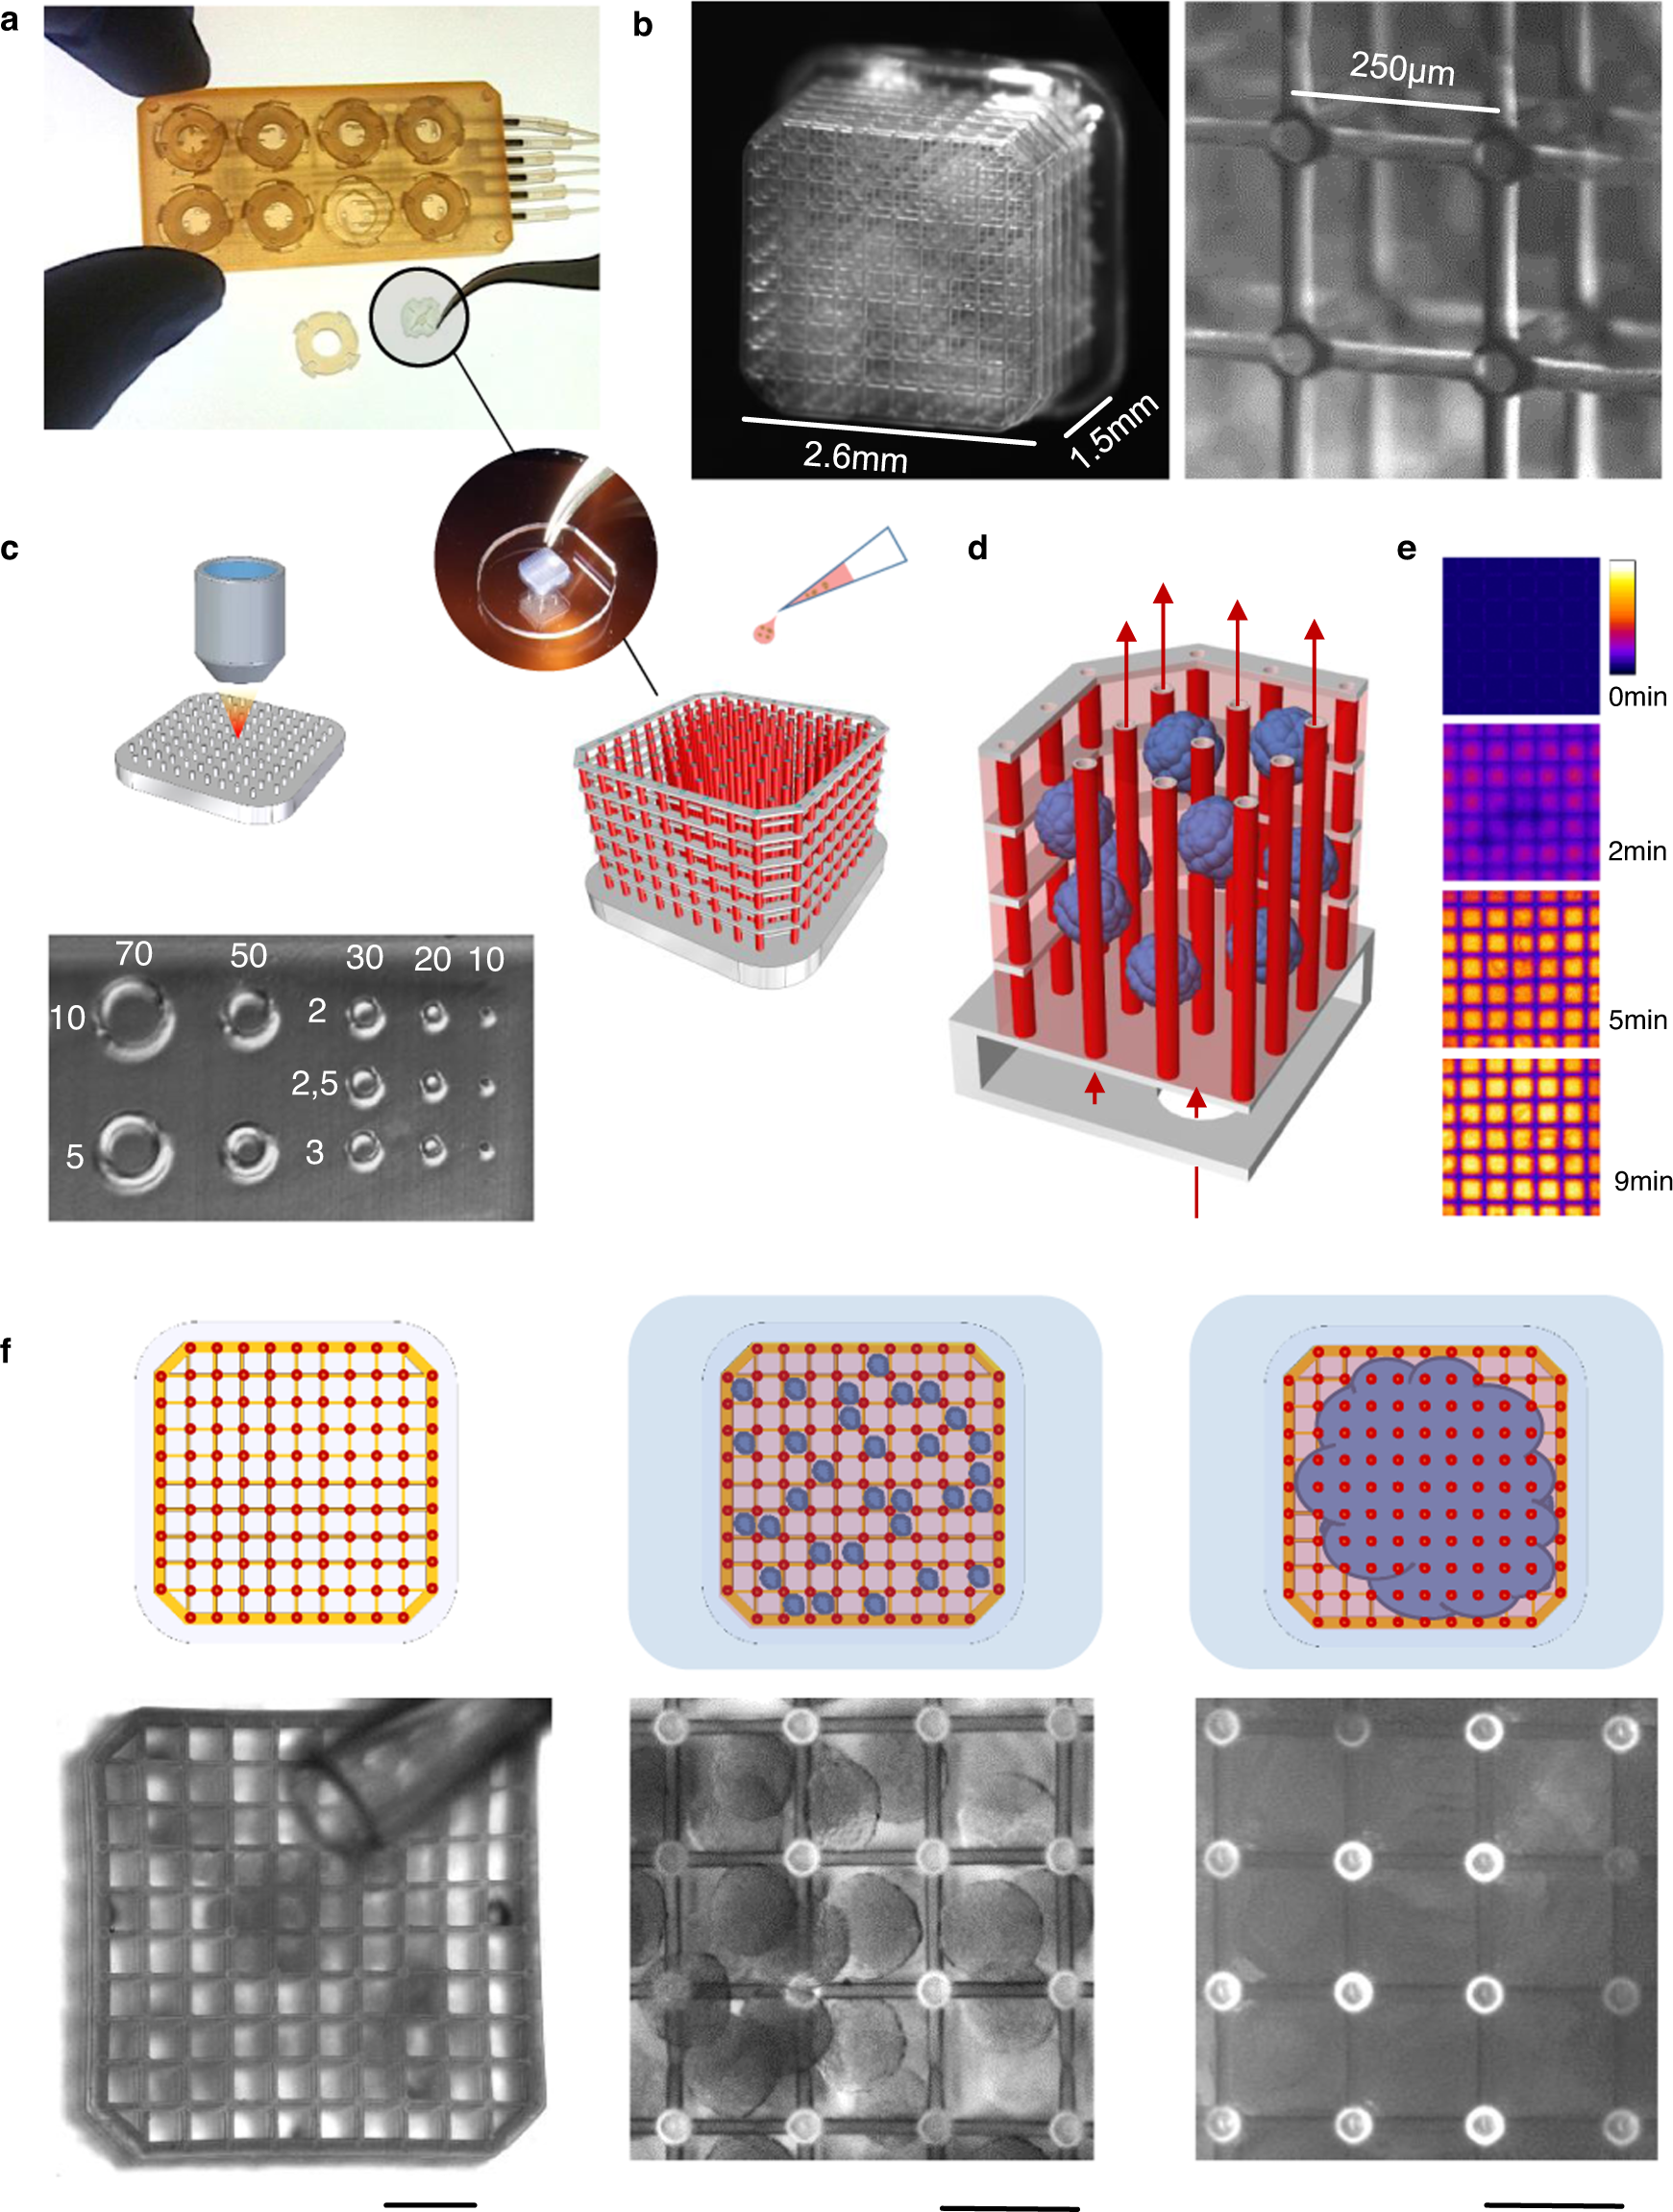 Large-scale perfused tissues via synthetic 3D soft microfluidics